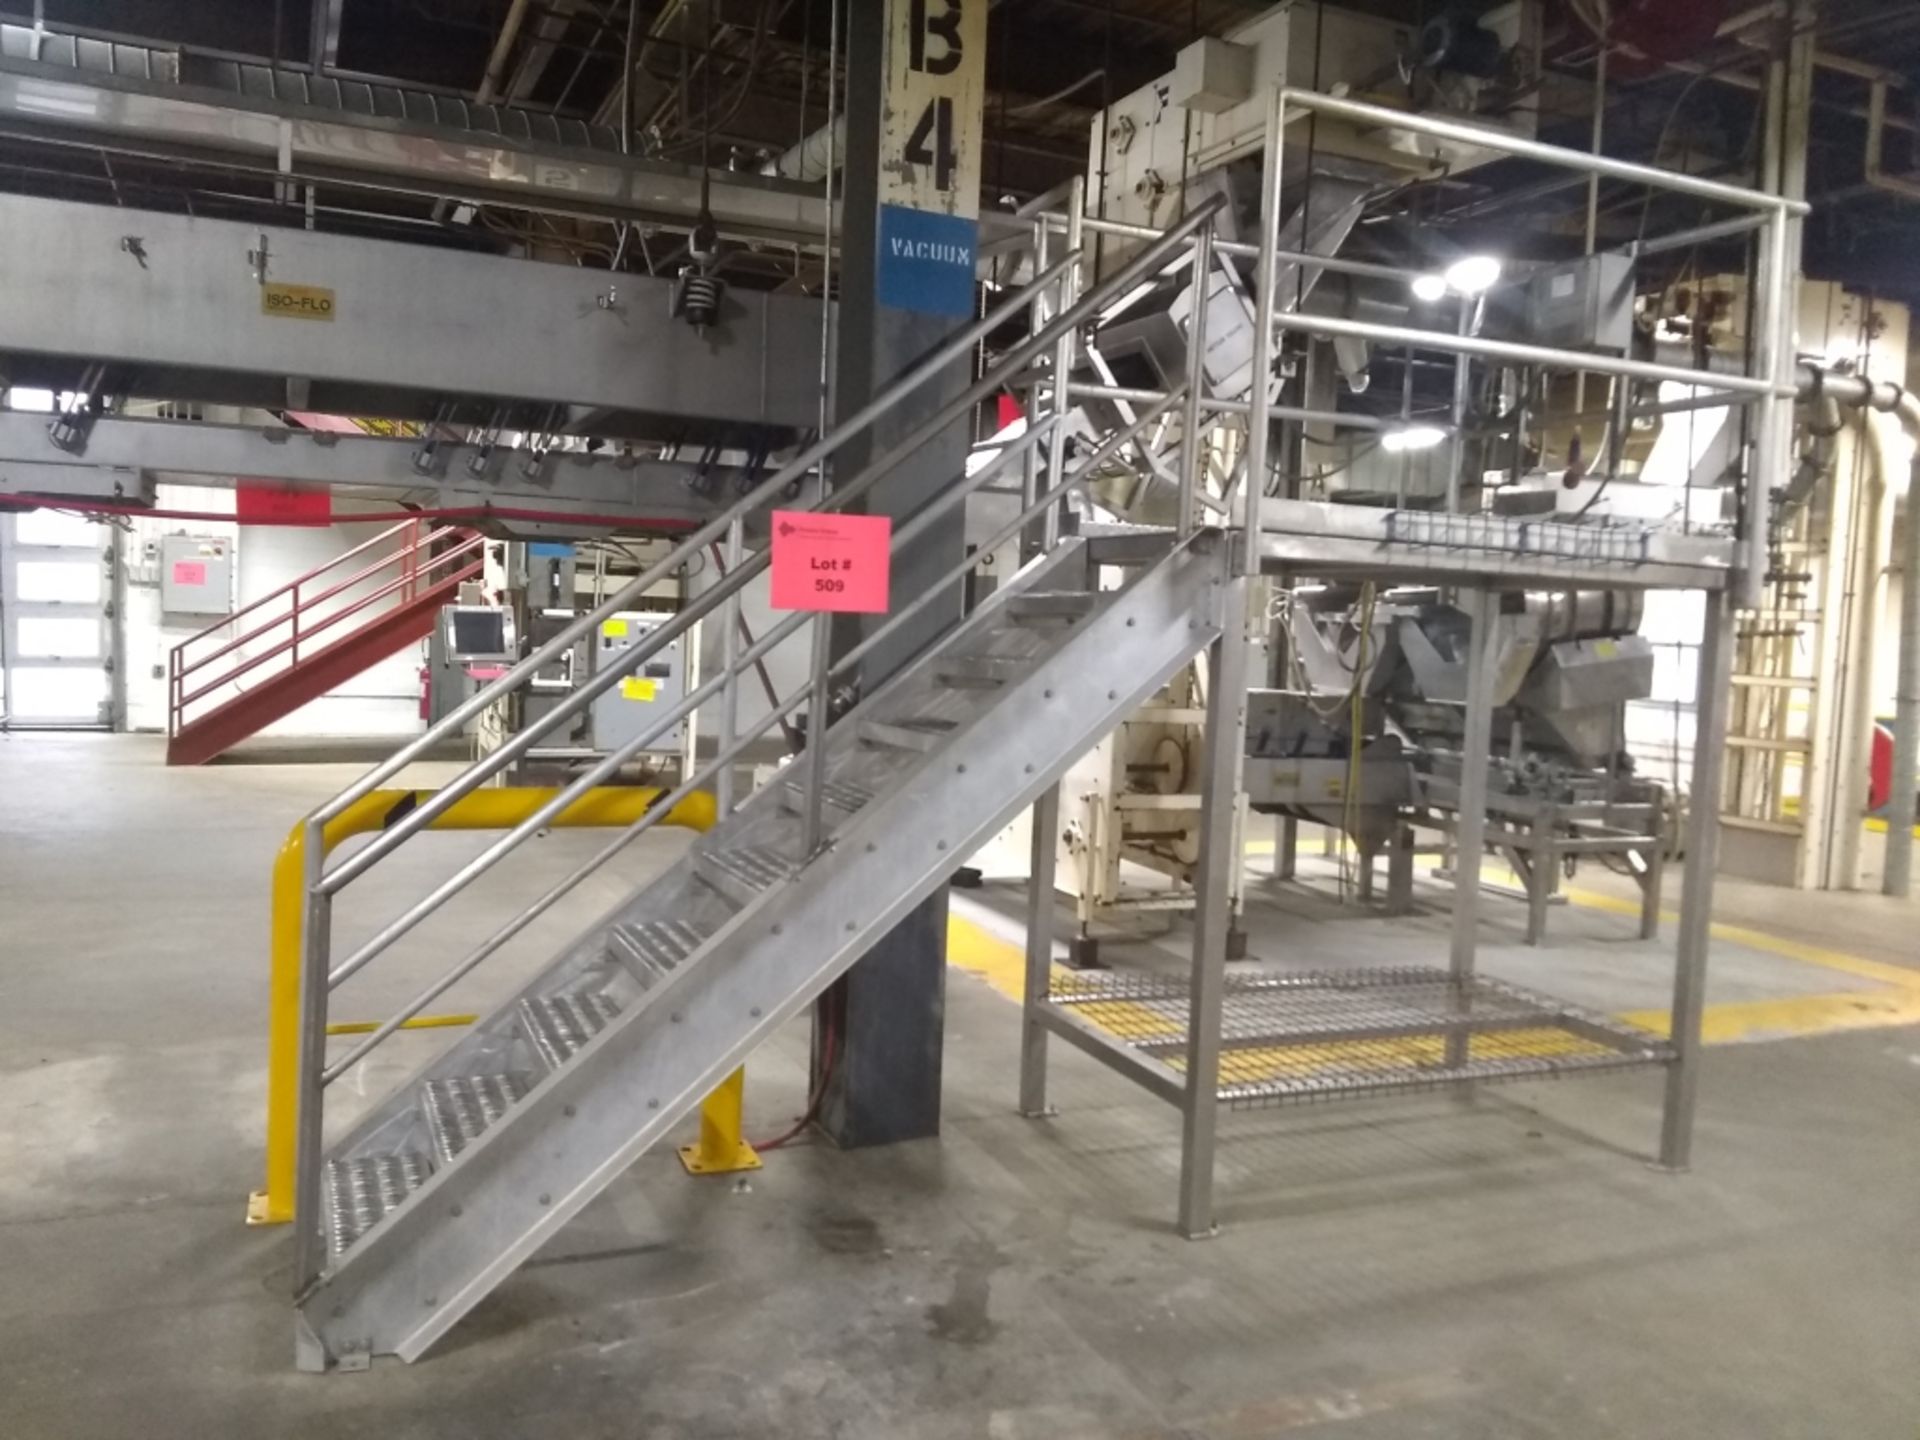 Stainless Steel Work Platform w/ Staircase - Image 2 of 4